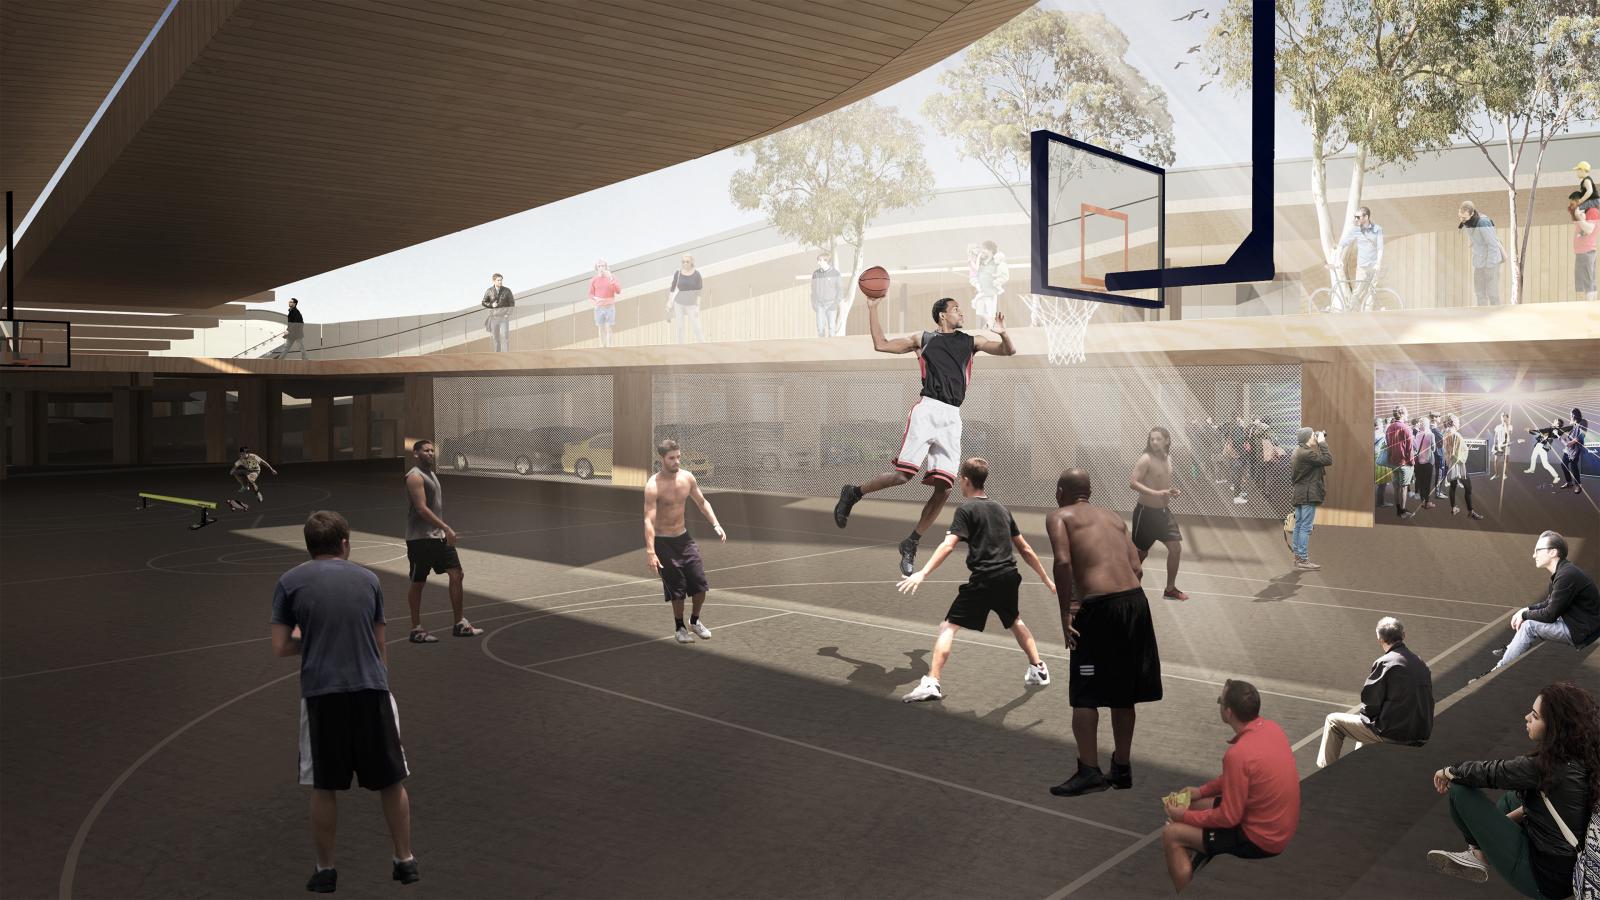 A group of people are playing basketball on an outdoor court under a covered pavilion near Cato St. One player is mid-air, about to dunk the ball. Spectators are watching from a raised platform in the background. Tree foliage and a clear sky are visible beyond the structure and adjacent car park.